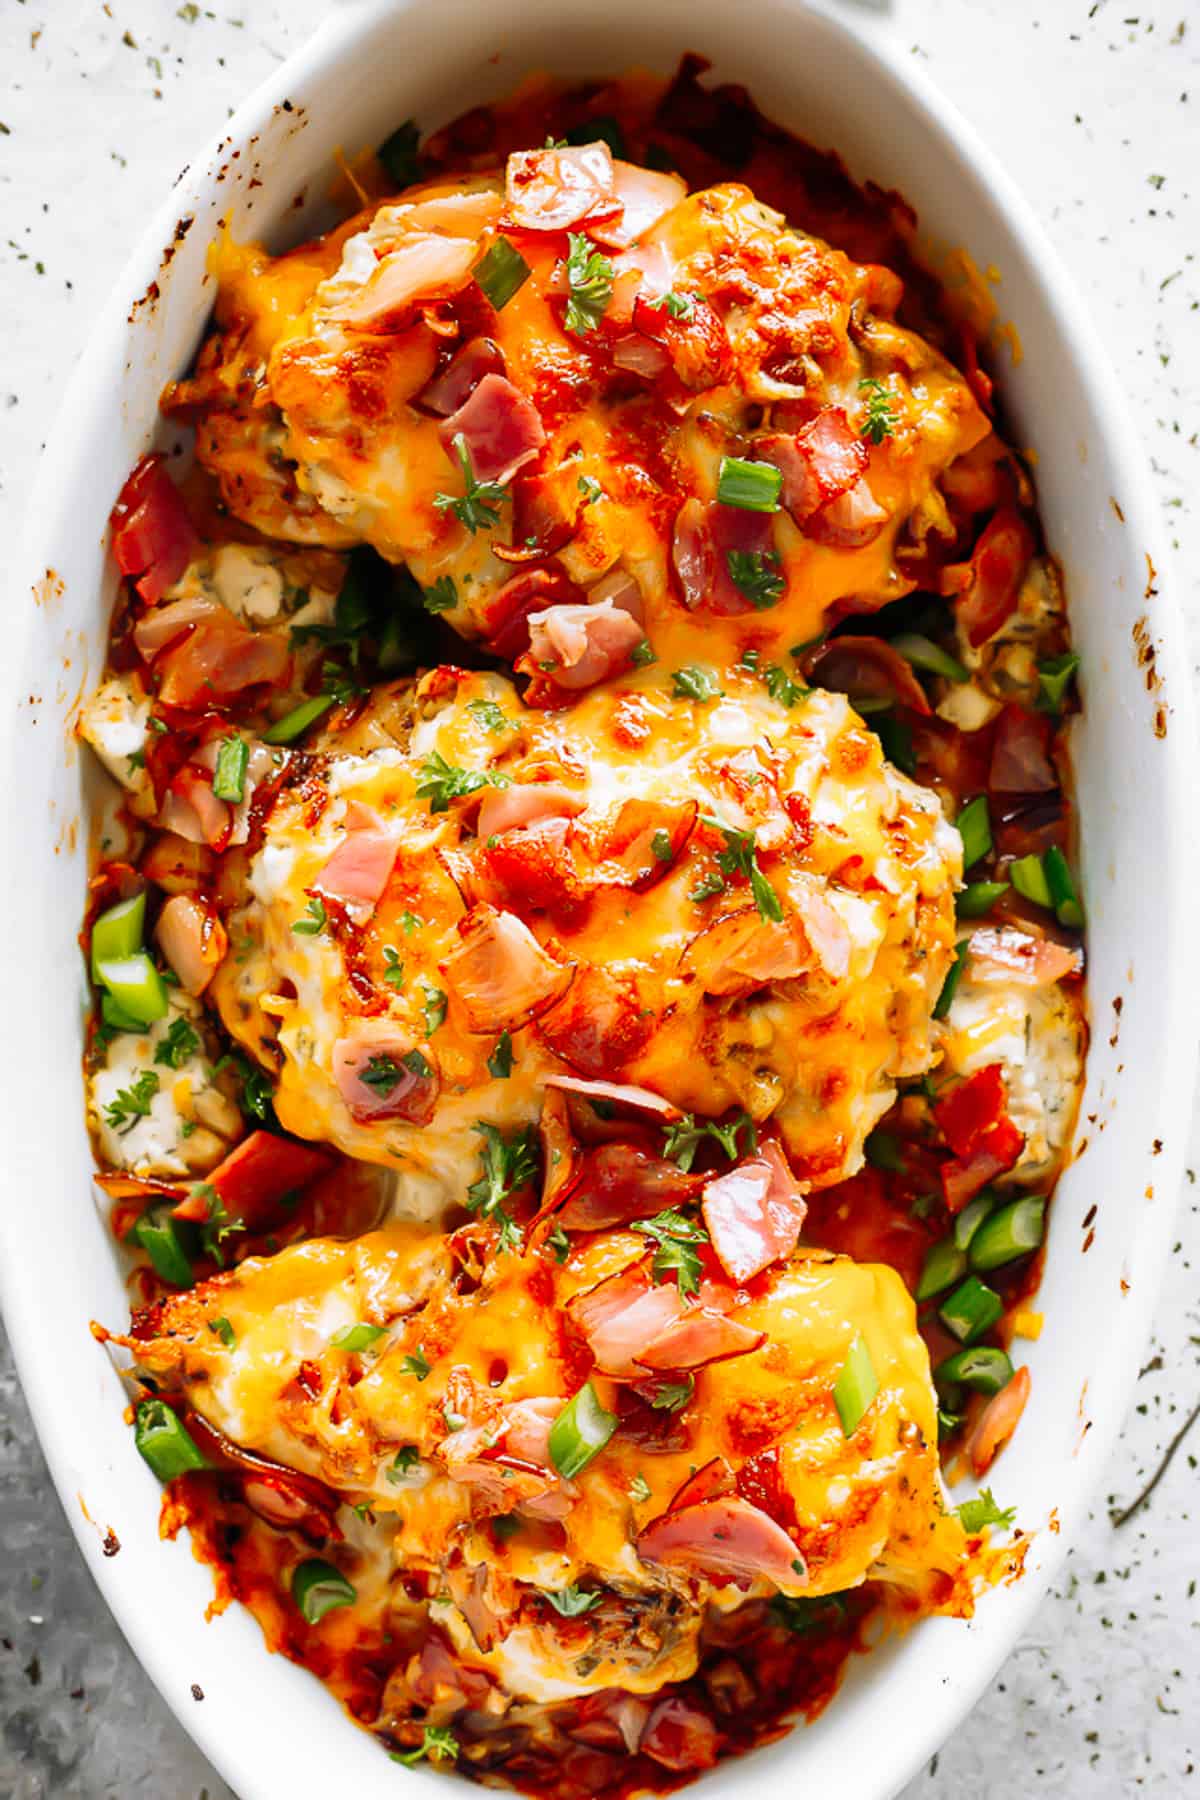 three baked chicken breasts in a white baking dish, and topped with melted cheese, crumbled bacon, and sliced green onions.